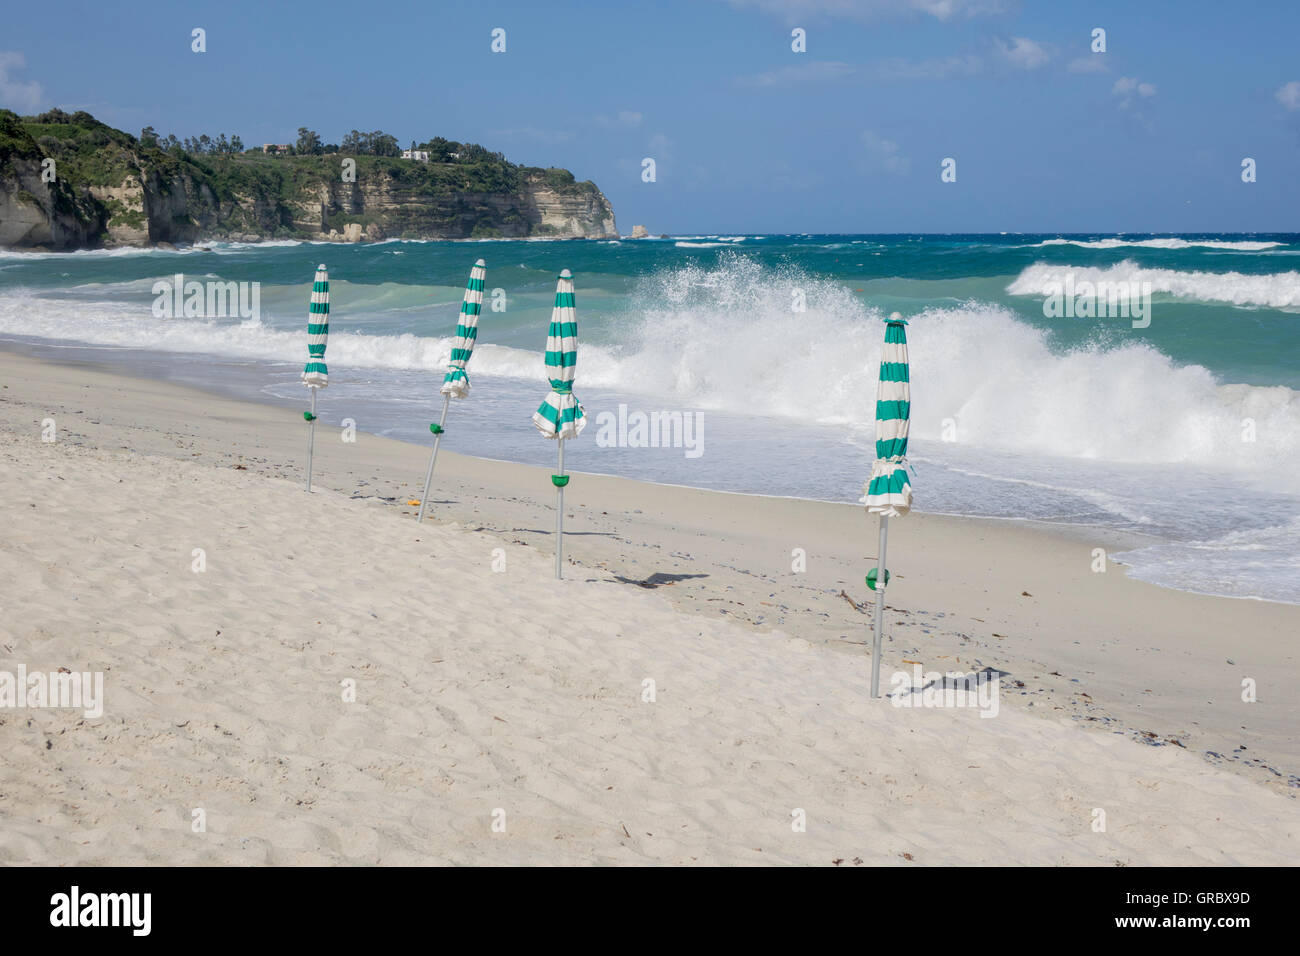 White Sandy Beach, Blue Sky, Waves, Closed Green And White Sun Shades, Cliffs With Some Trees In The Background. Tropea, Calabria, Italy Stock Photo